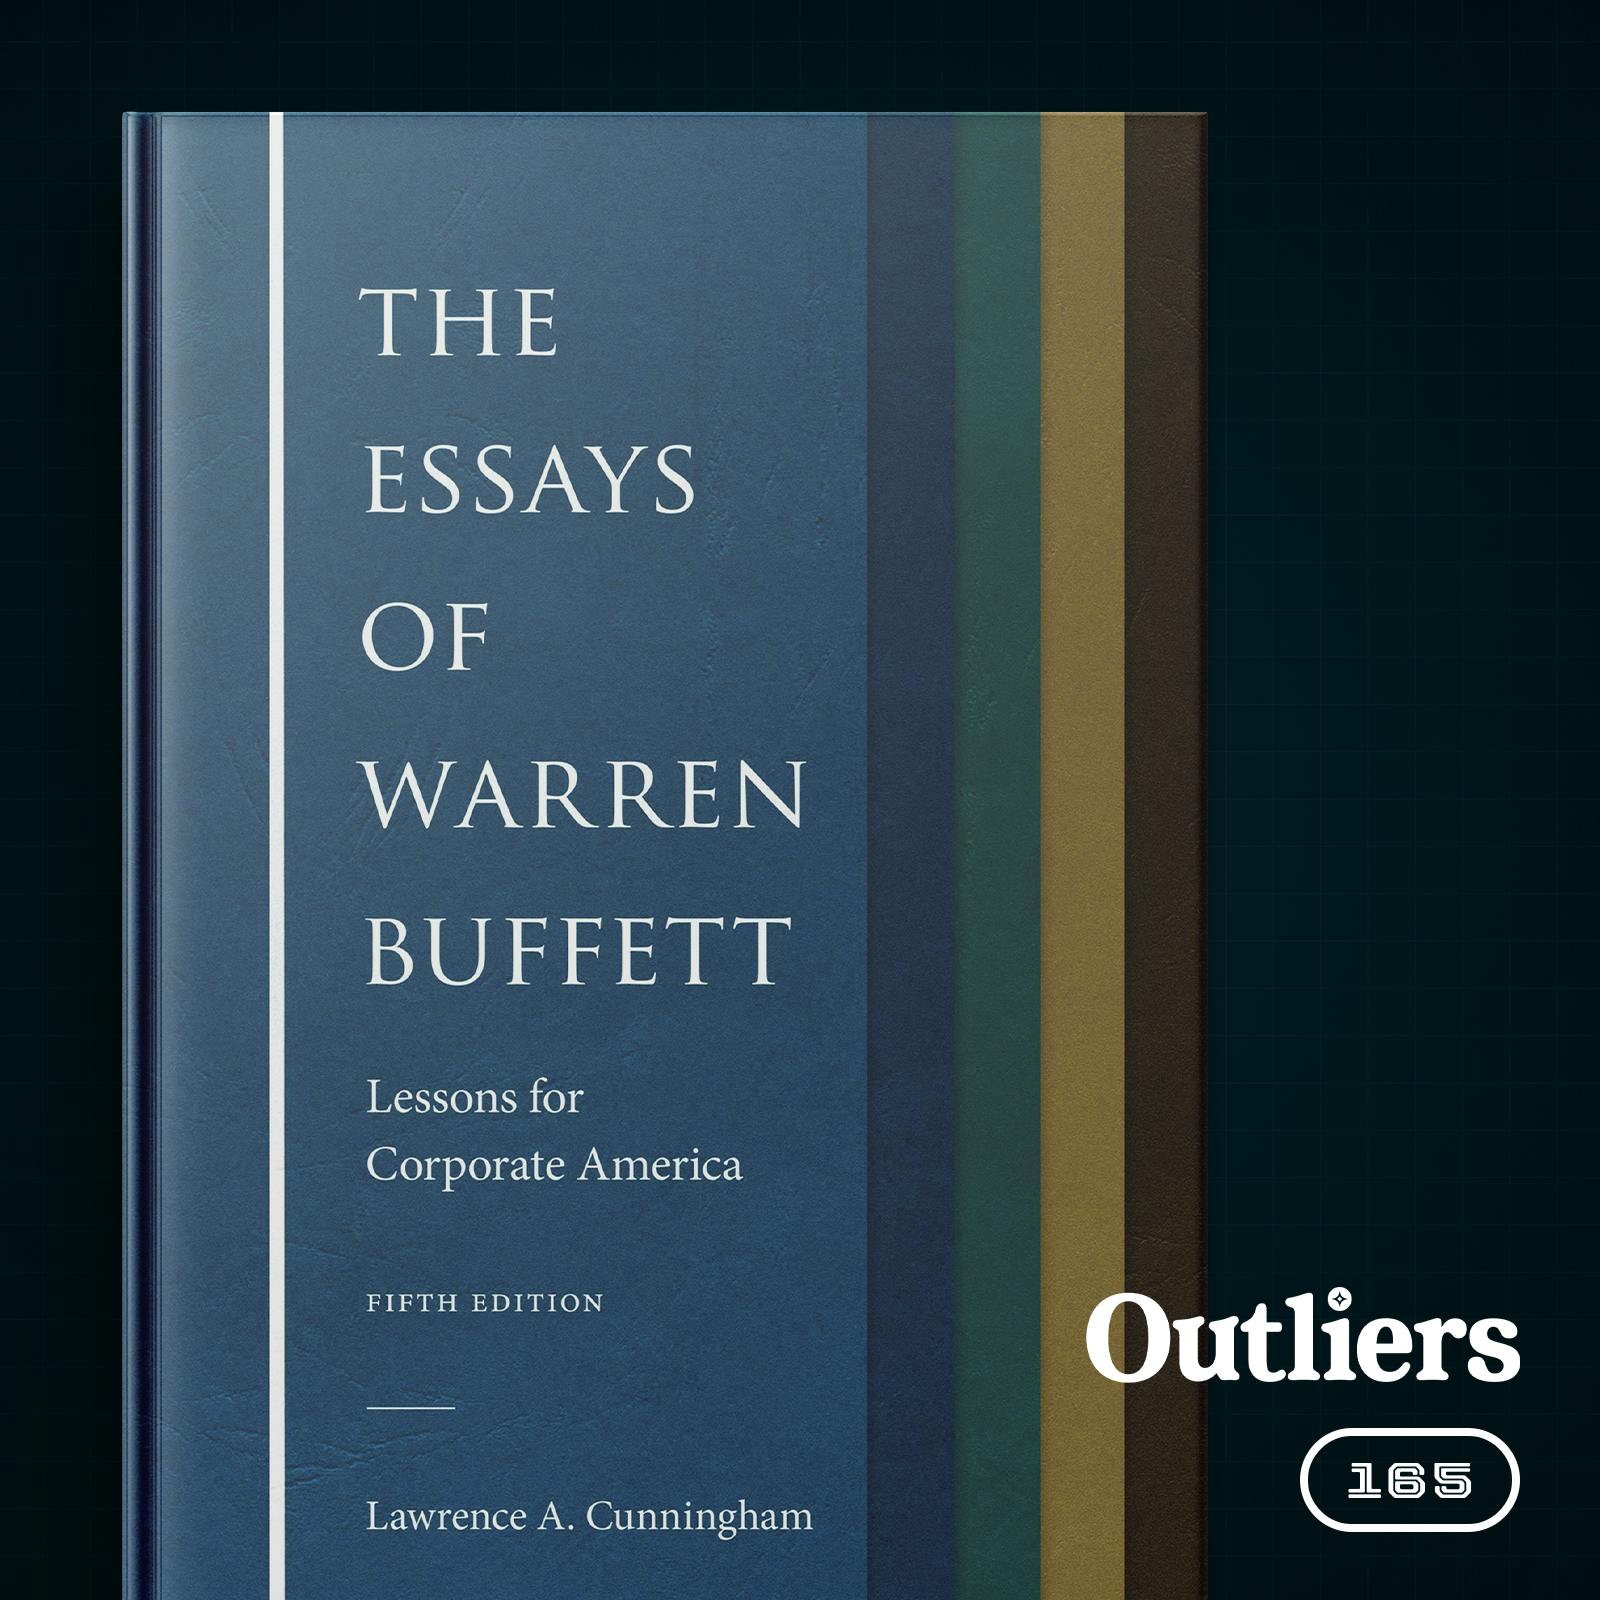 Trailer - #165 Book Breakdown (Part 1 of 2): “The Essays of Warren Buffett: Lessons for Corporate America” by Lawrence Cunningham | Outliers with Daniel Scrivner